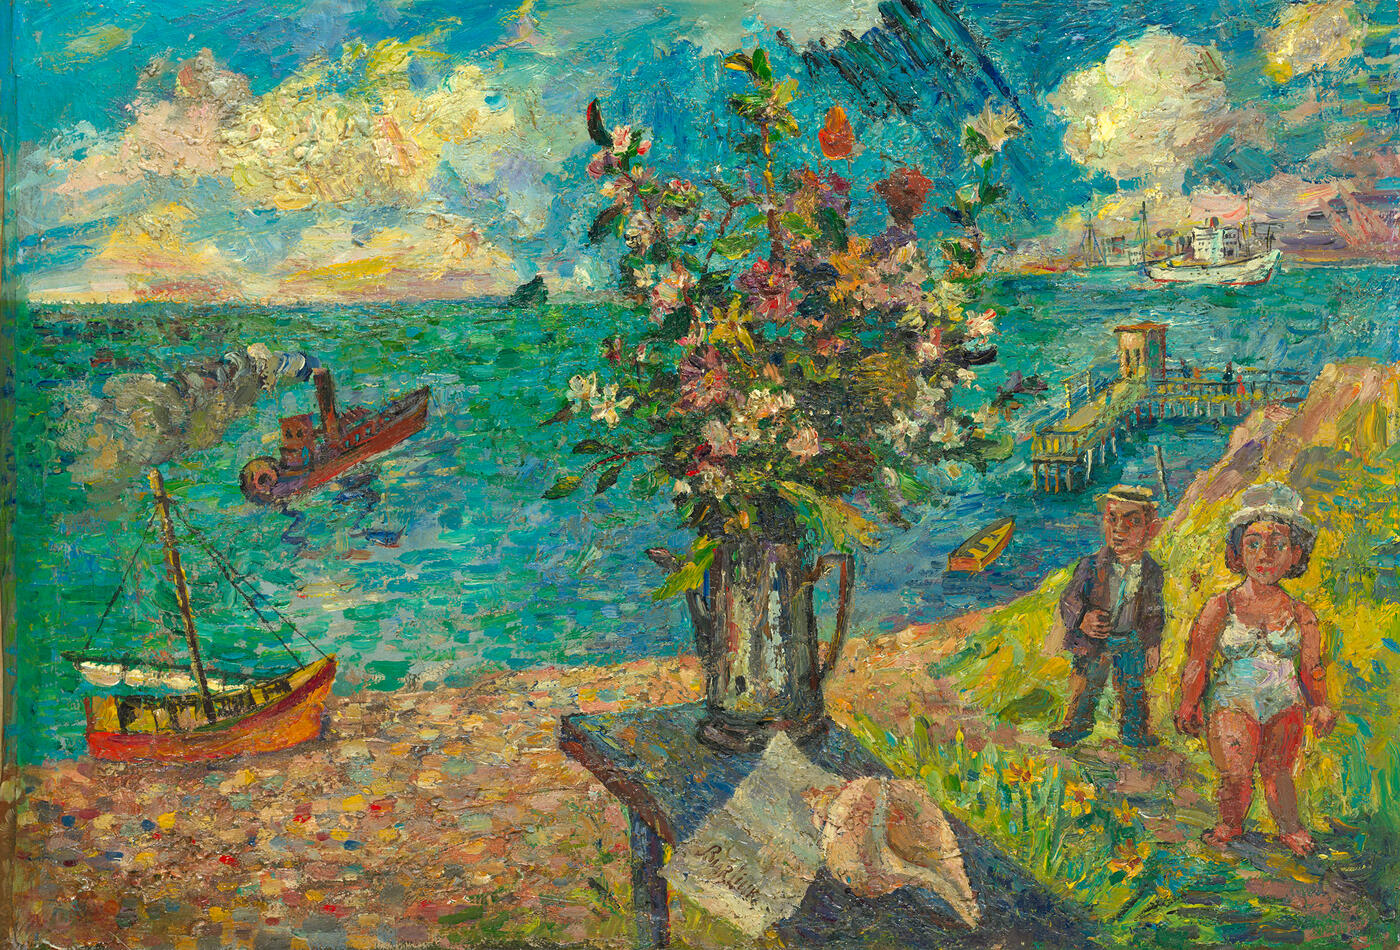 Harbour Scene with Still Life and the Burliuk Family